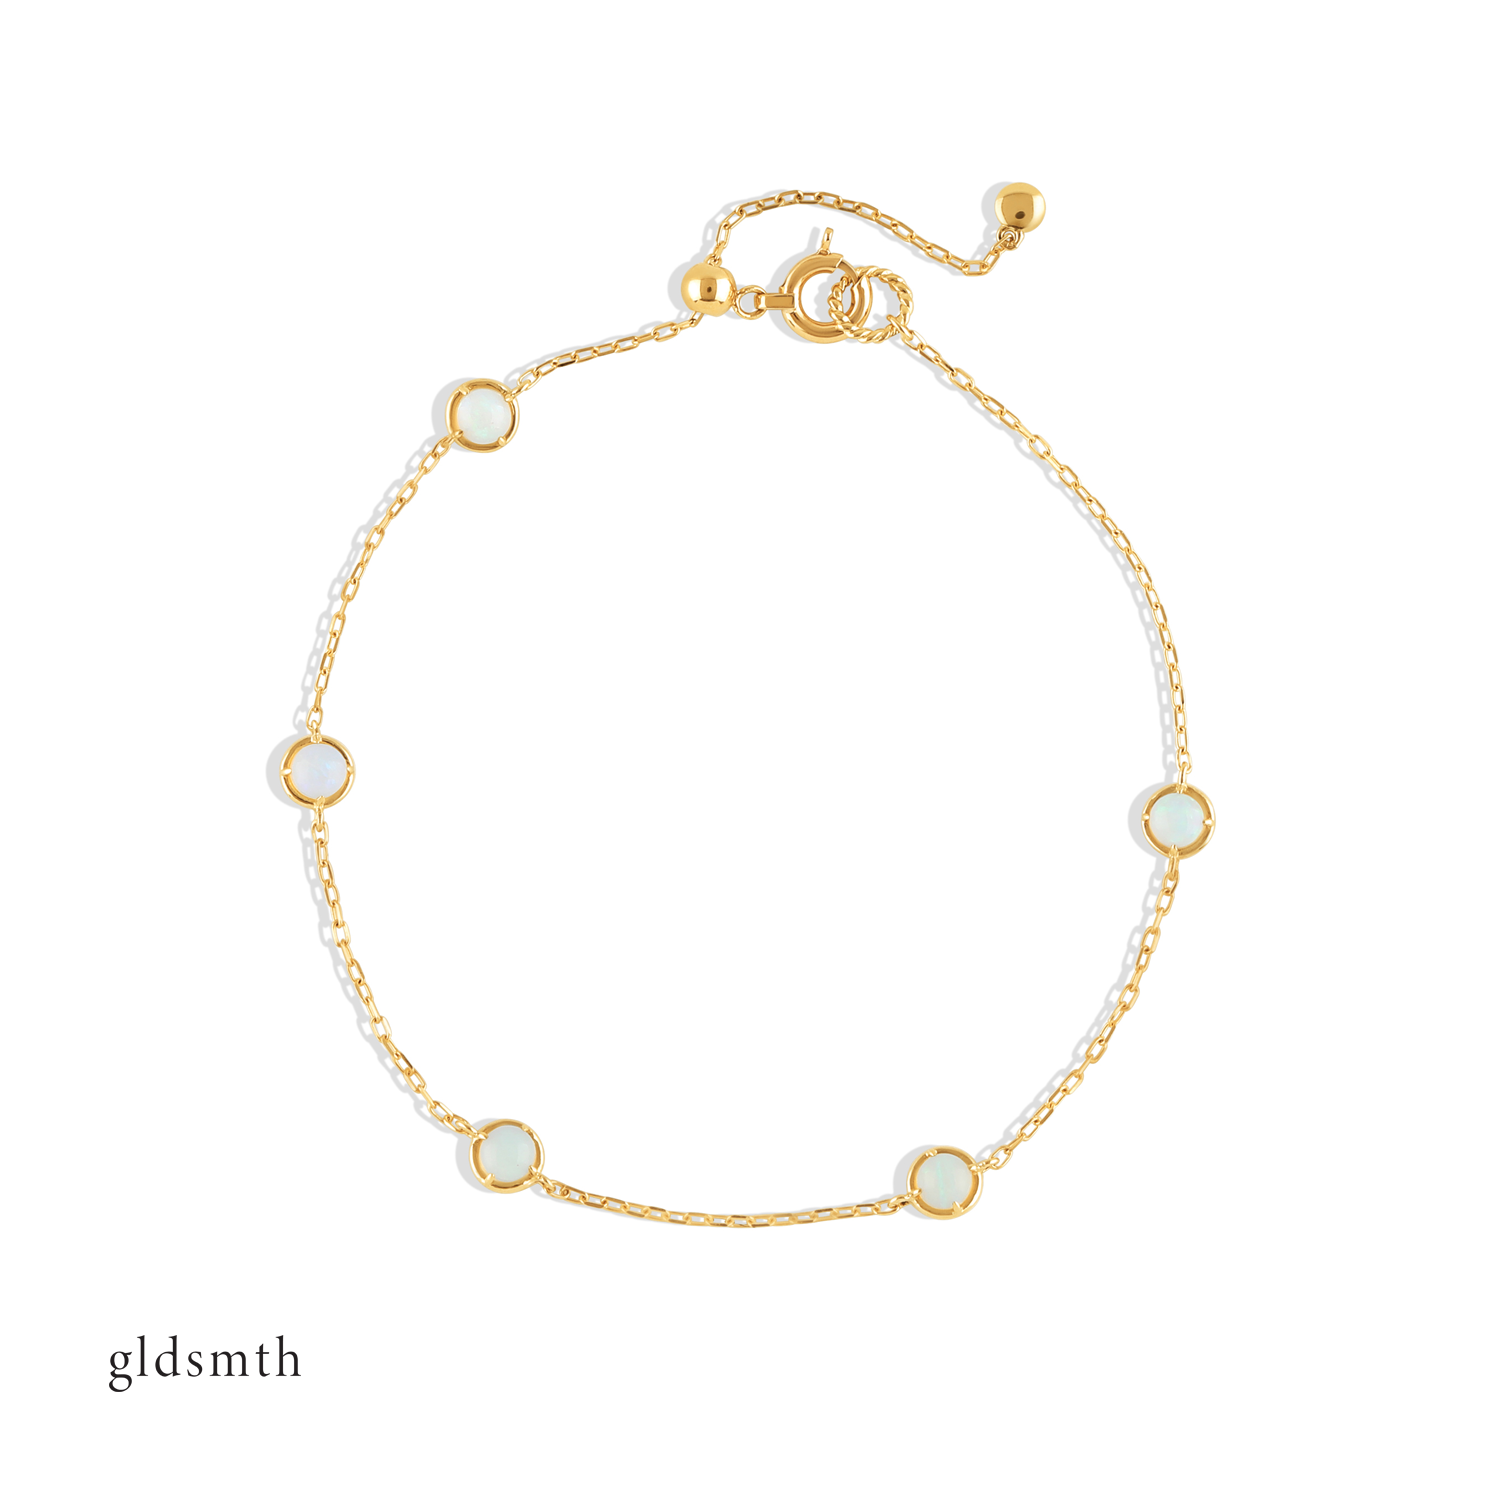 Elegant and fine handcrafted 10k solid gold bracelet with opals.